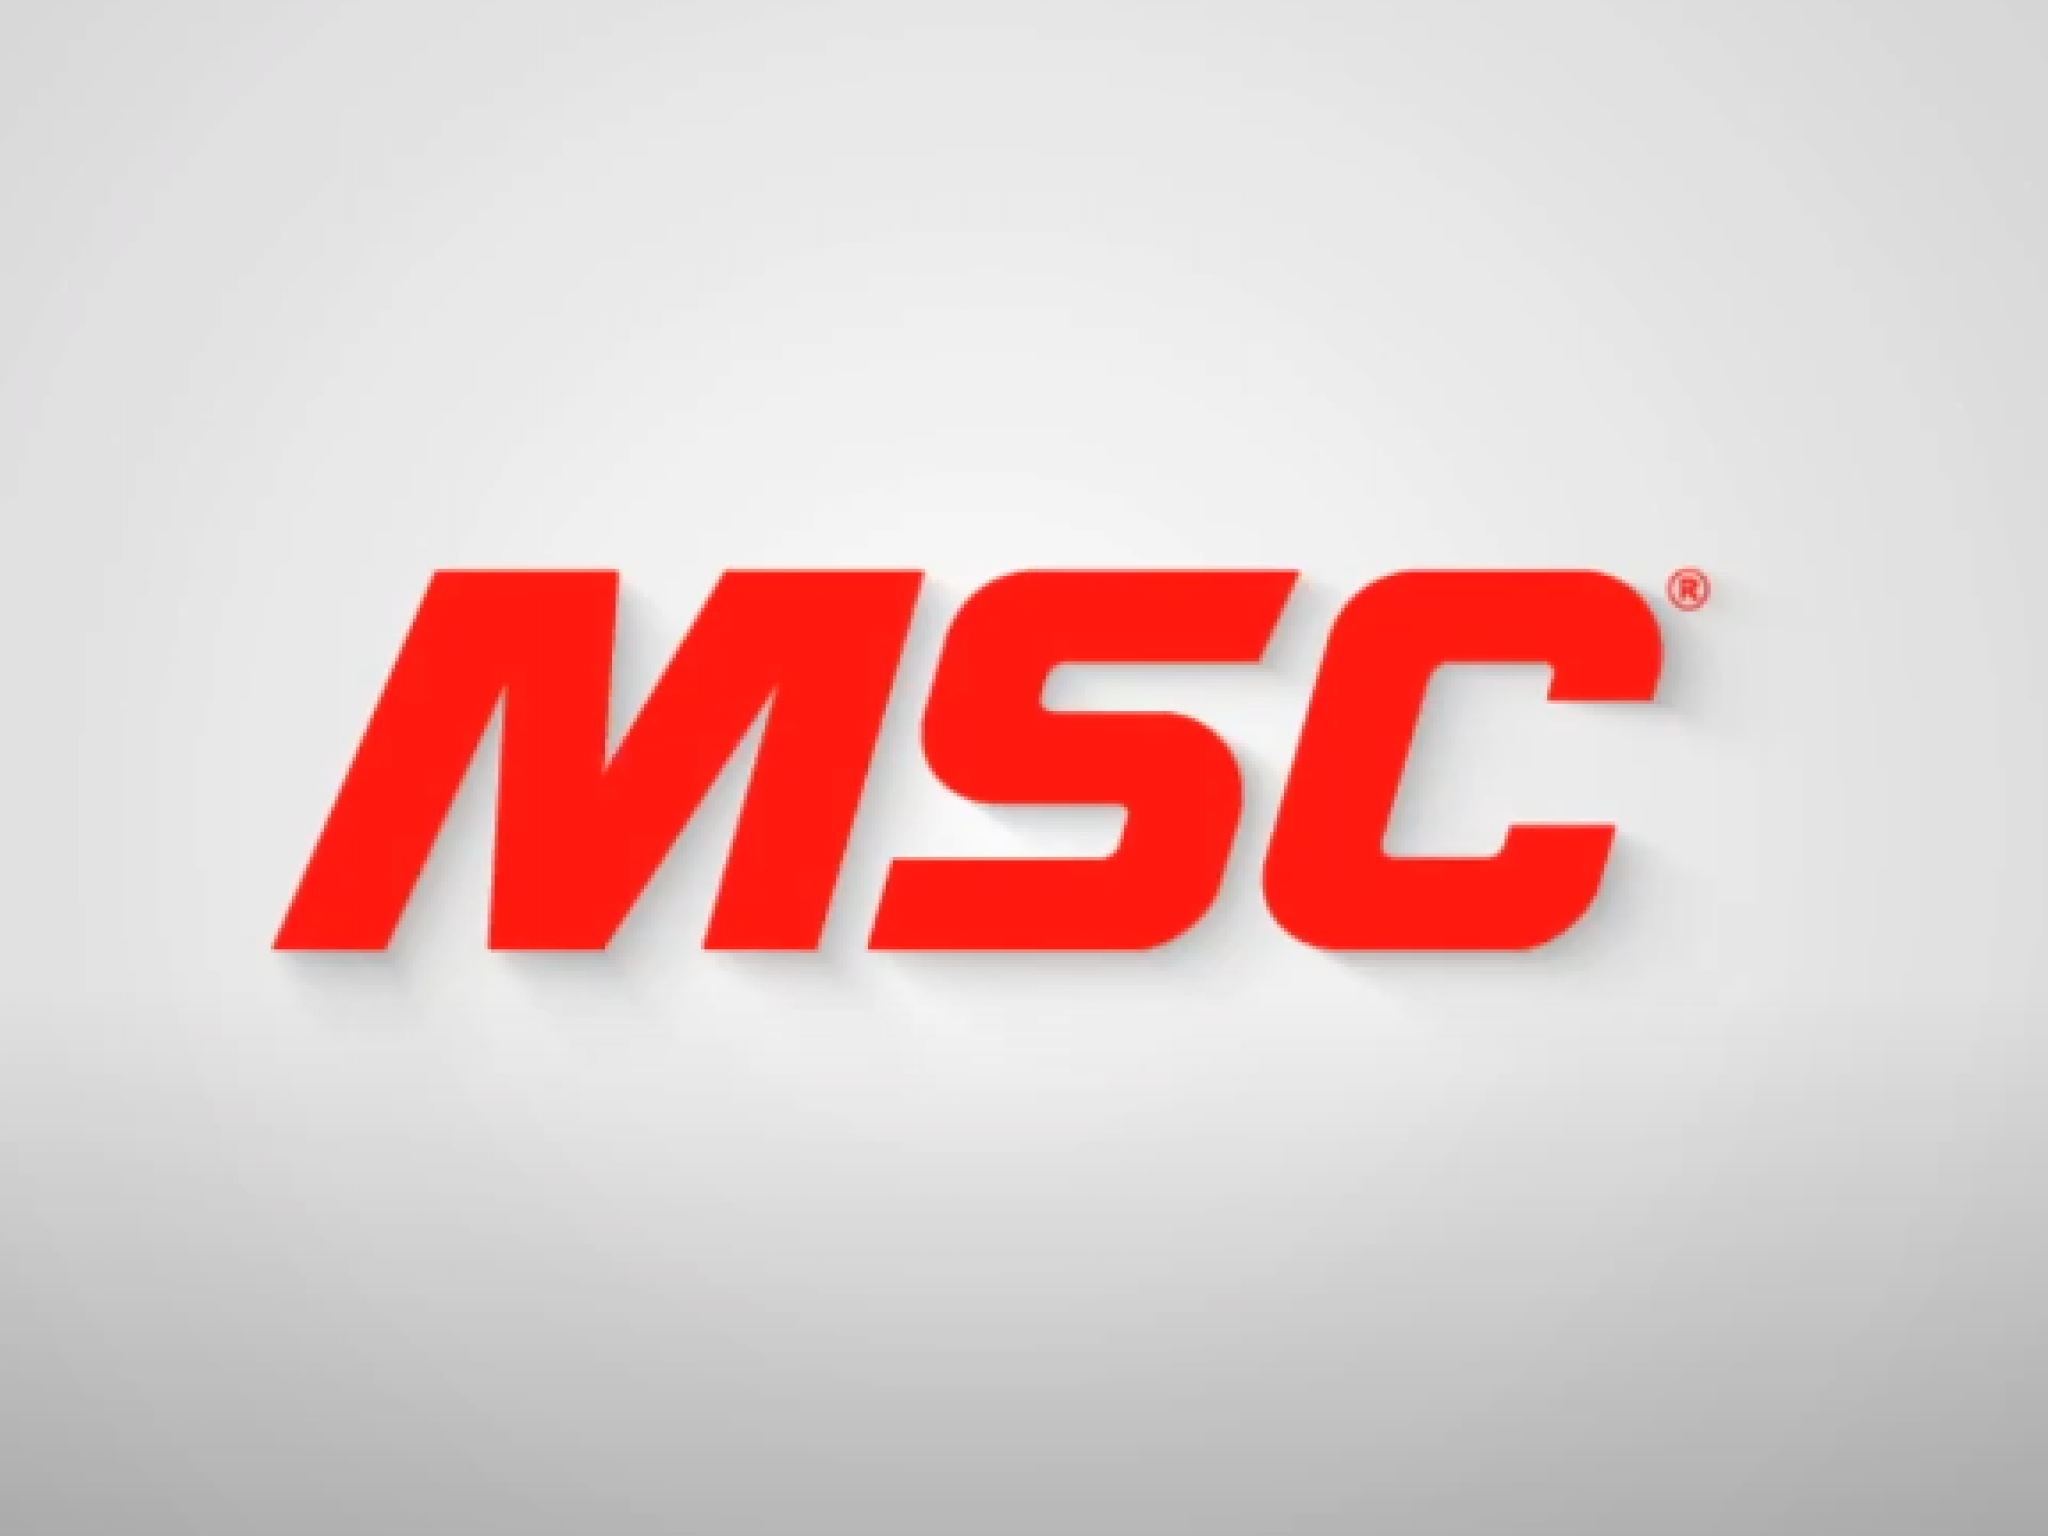  how-to-earn-500-a-month-from-msc-industrial-stock-ahead-of-q3-earnings 